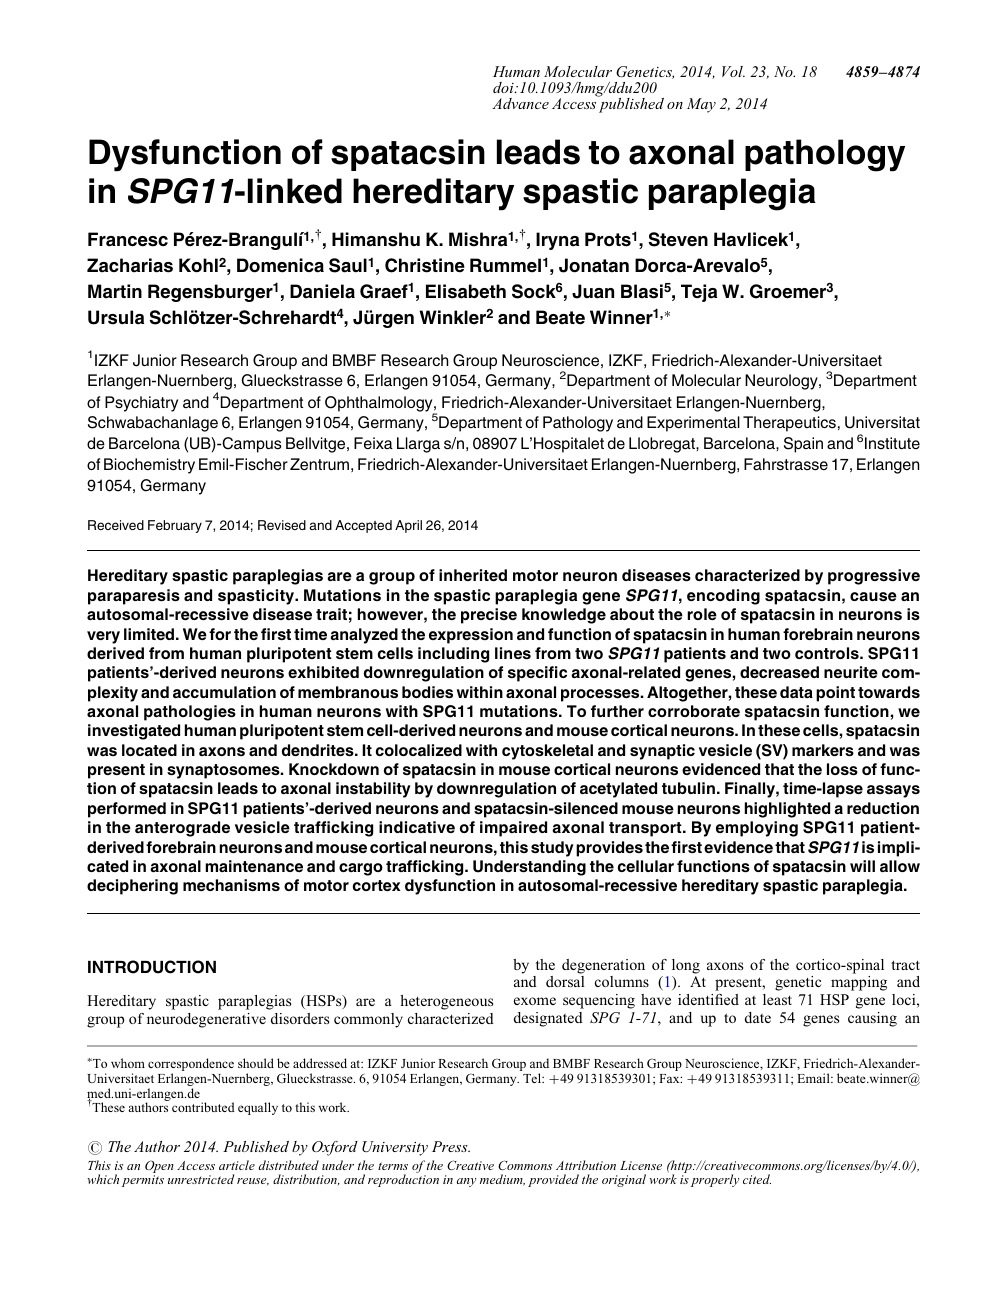 Dysfunction Of Spatacsin Leads To Axonal Pathology In Spg11 Linked Hereditary Spastic Paraplegia Topic Of Research Paper In Biological Sciences Download Scholarly Article Pdf And Read For Free On Cyberleninka Open Science